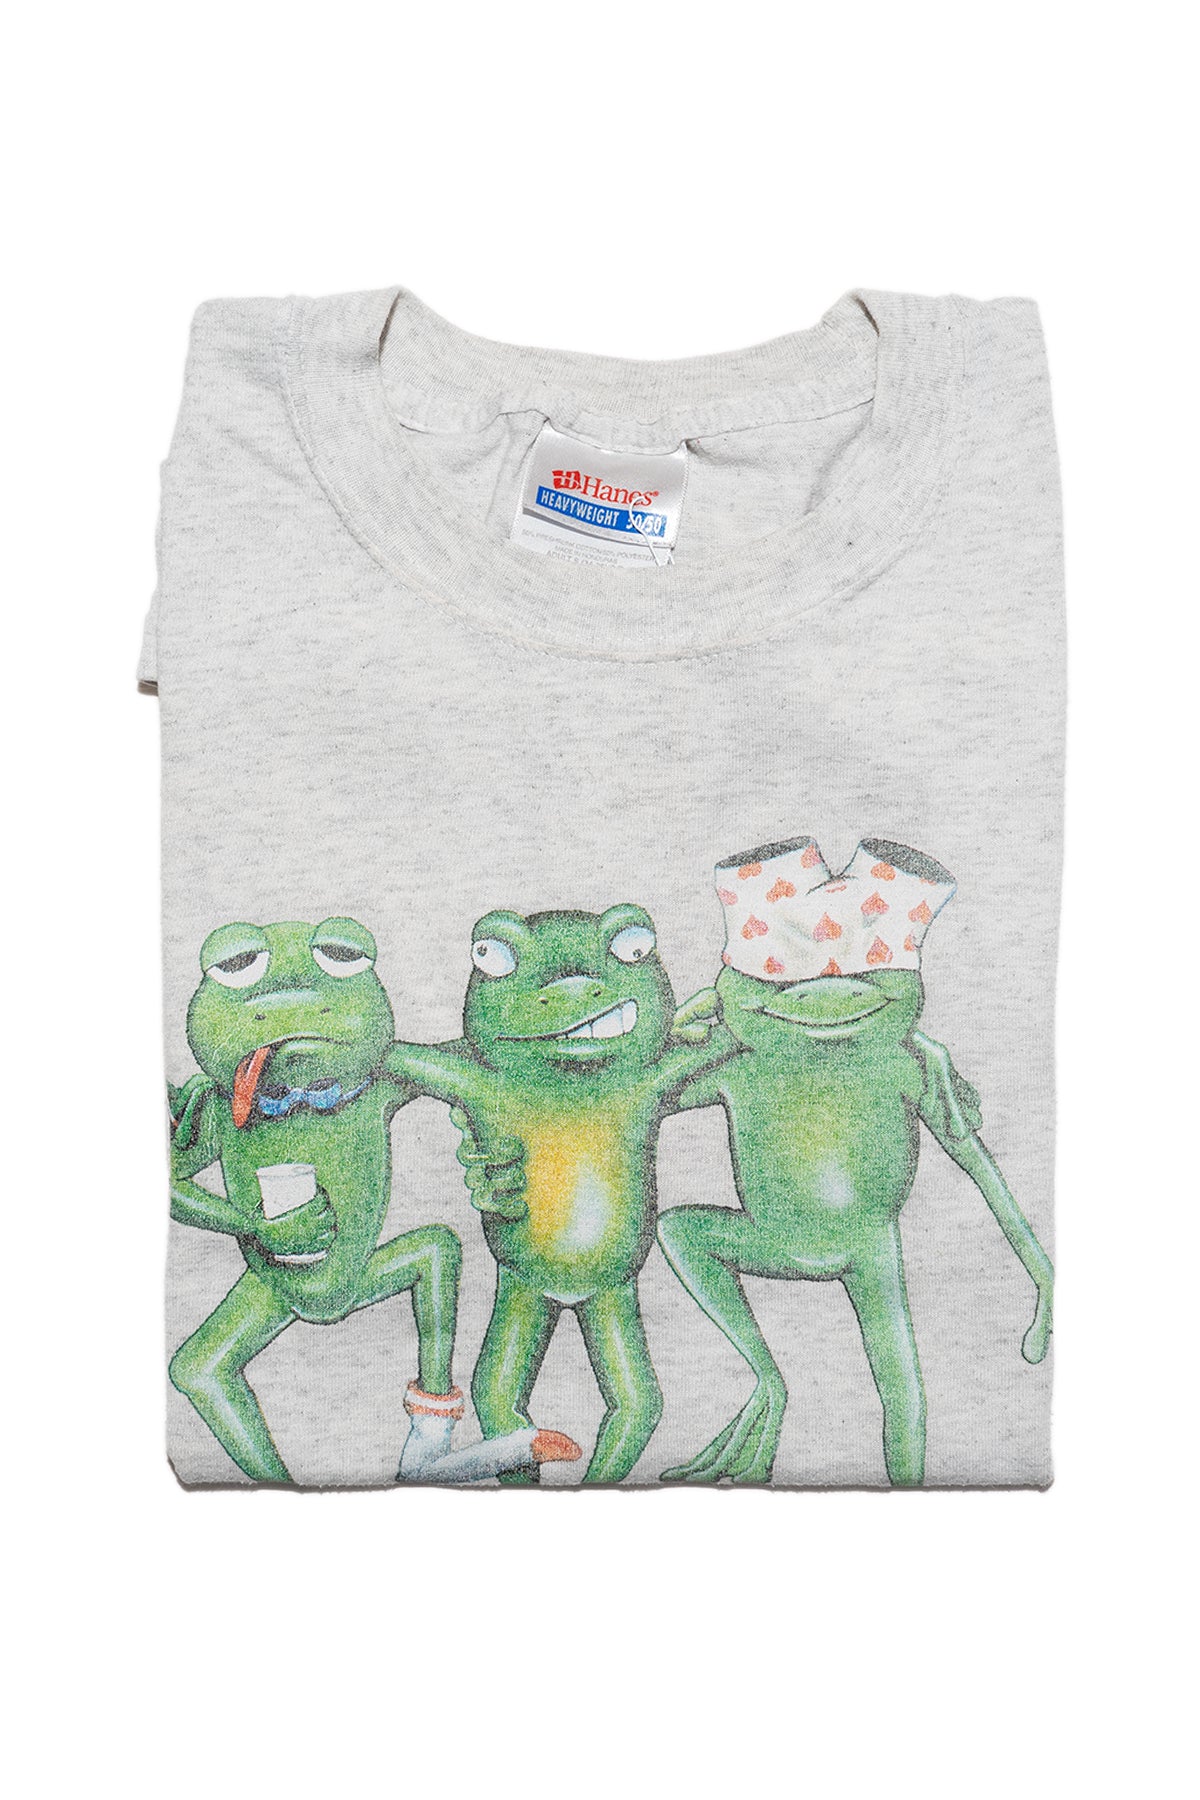 PREMIUM VTG T-SHIRT TOADILY WASTED